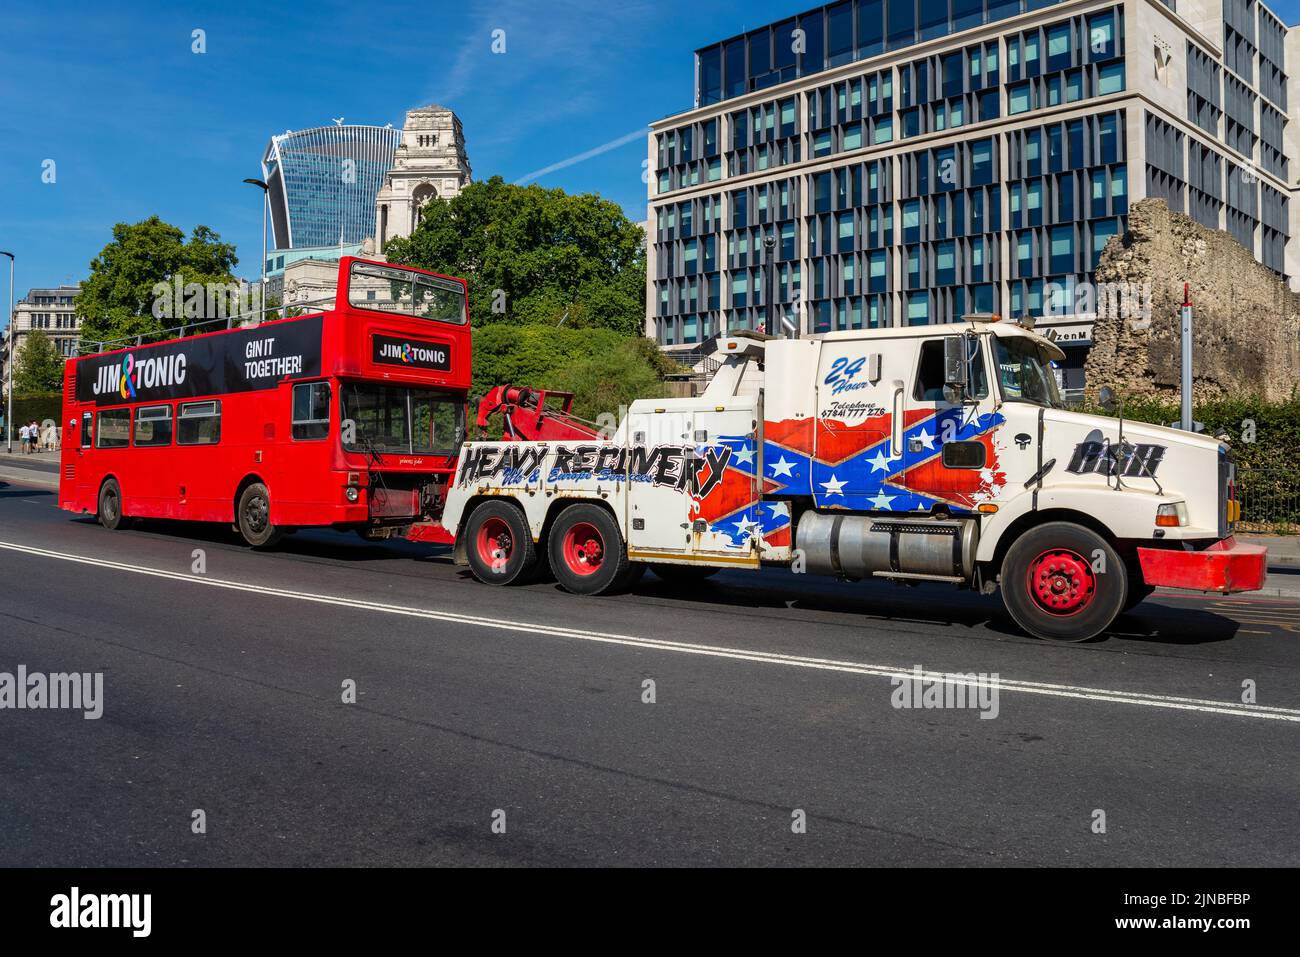 Heavy Recovery breakdown truck hauling a broken down bus. Jim and Tonic gin mobile bar bus being towed behind large American wrecking vehicle Stock Photo